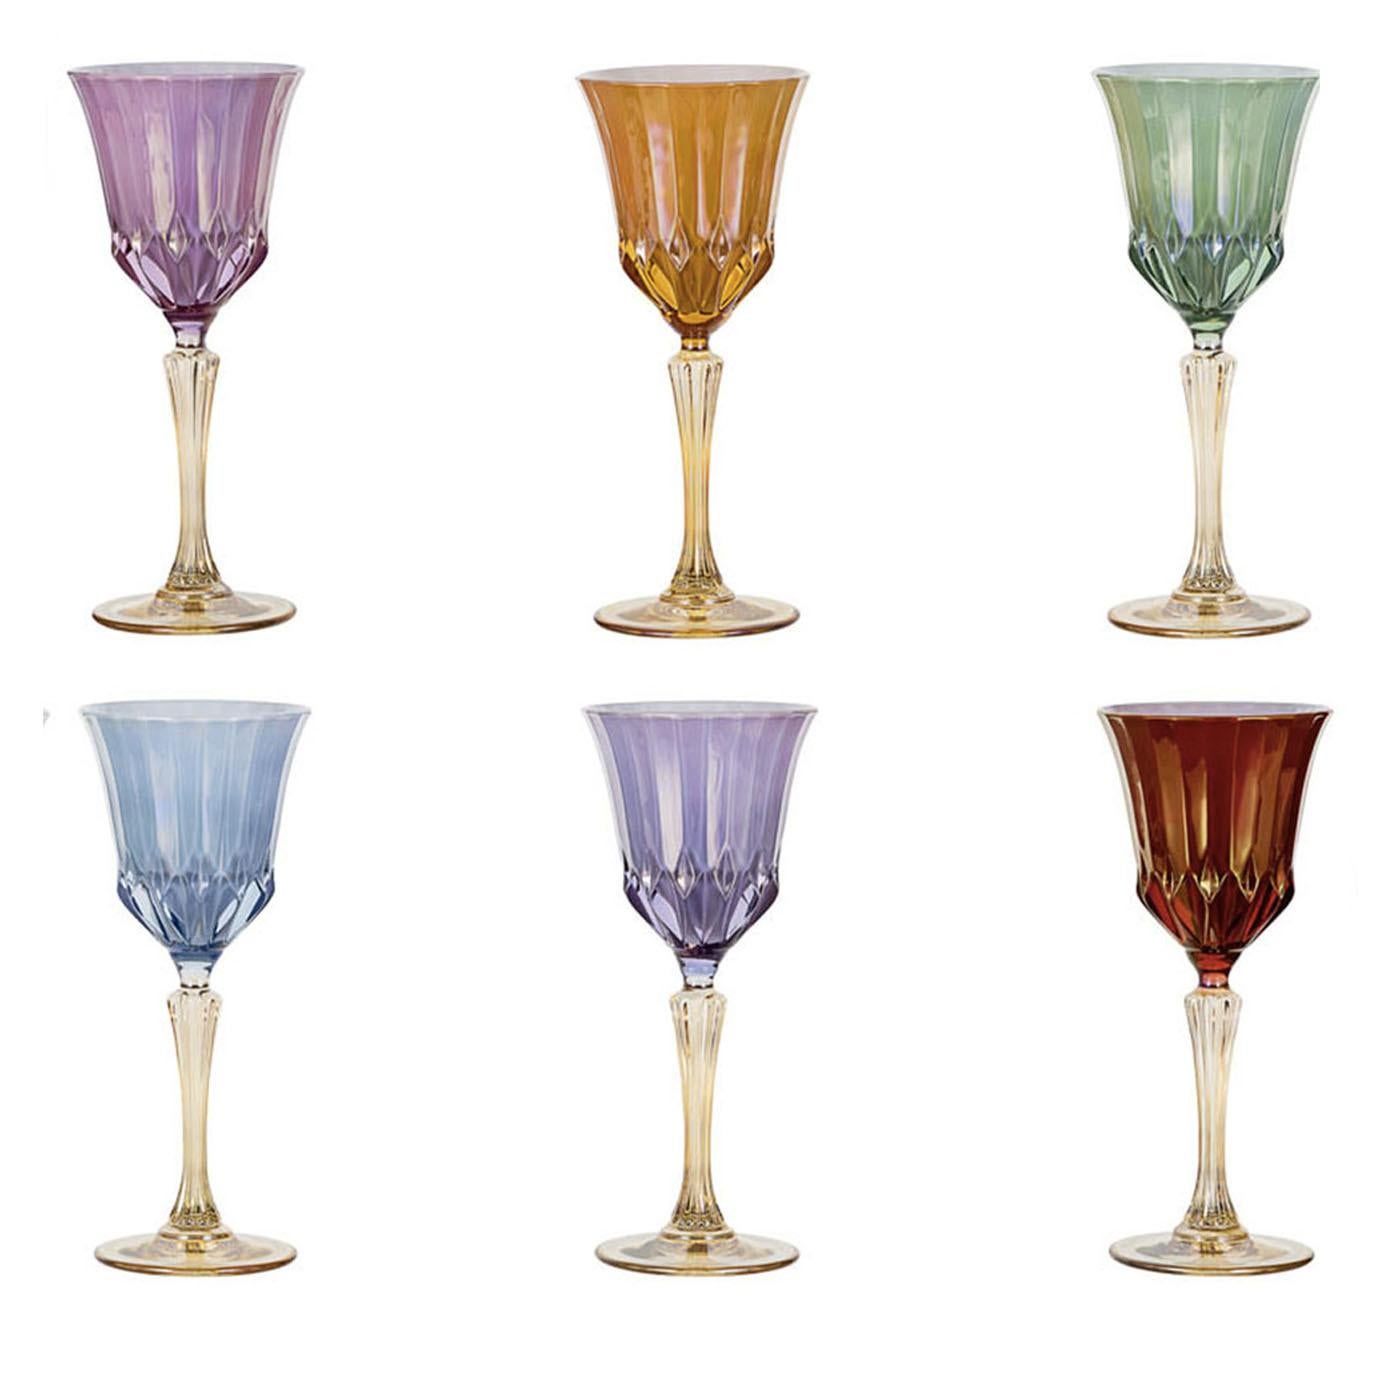 Each of these elegant 18cl liquor chalices come in a different vivid color and are made entirely by hand. They add a touch of luxury to any home.